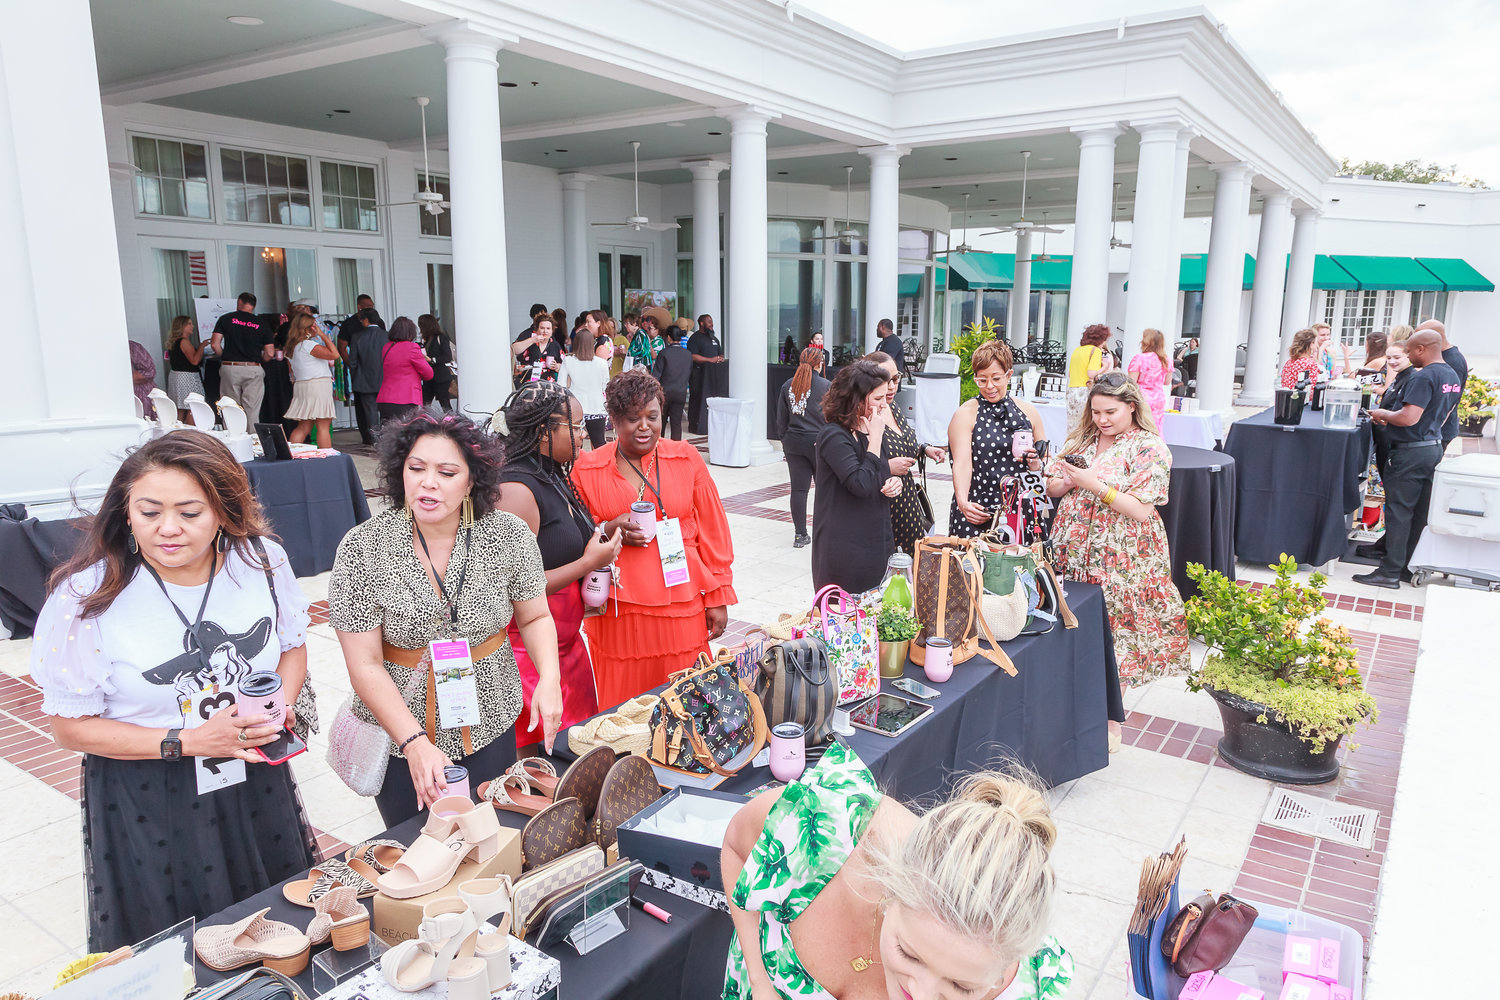 The Wine, Women & Shoes event offered opportunities to do some shopping.